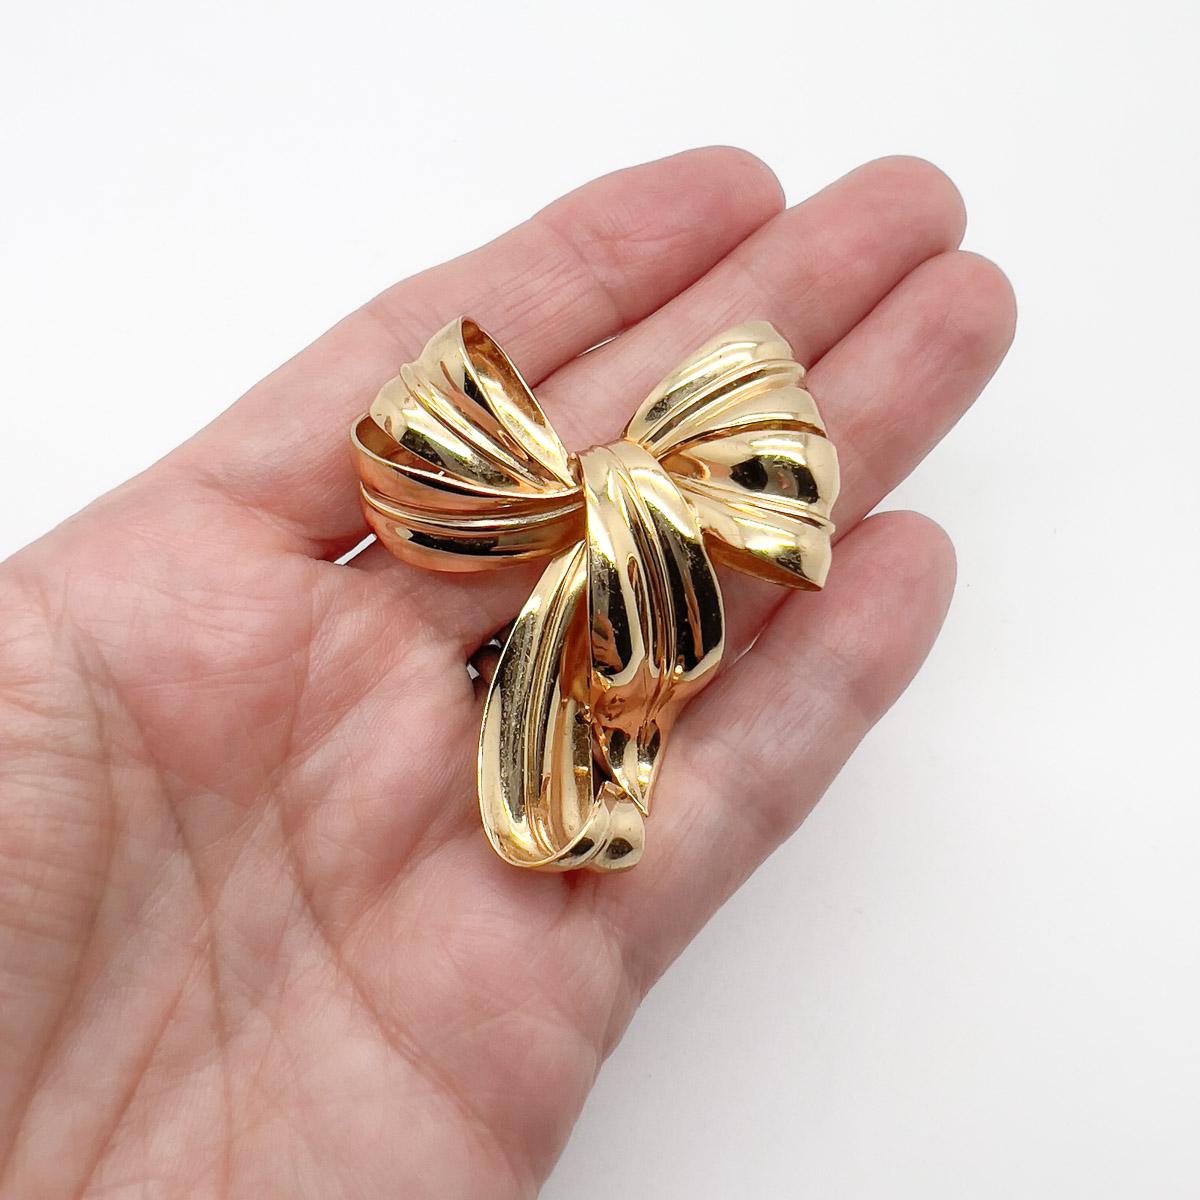 Vintage Christian Dior Floppy Bow Brooch 1980s In Good Condition For Sale In Wilmslow, GB